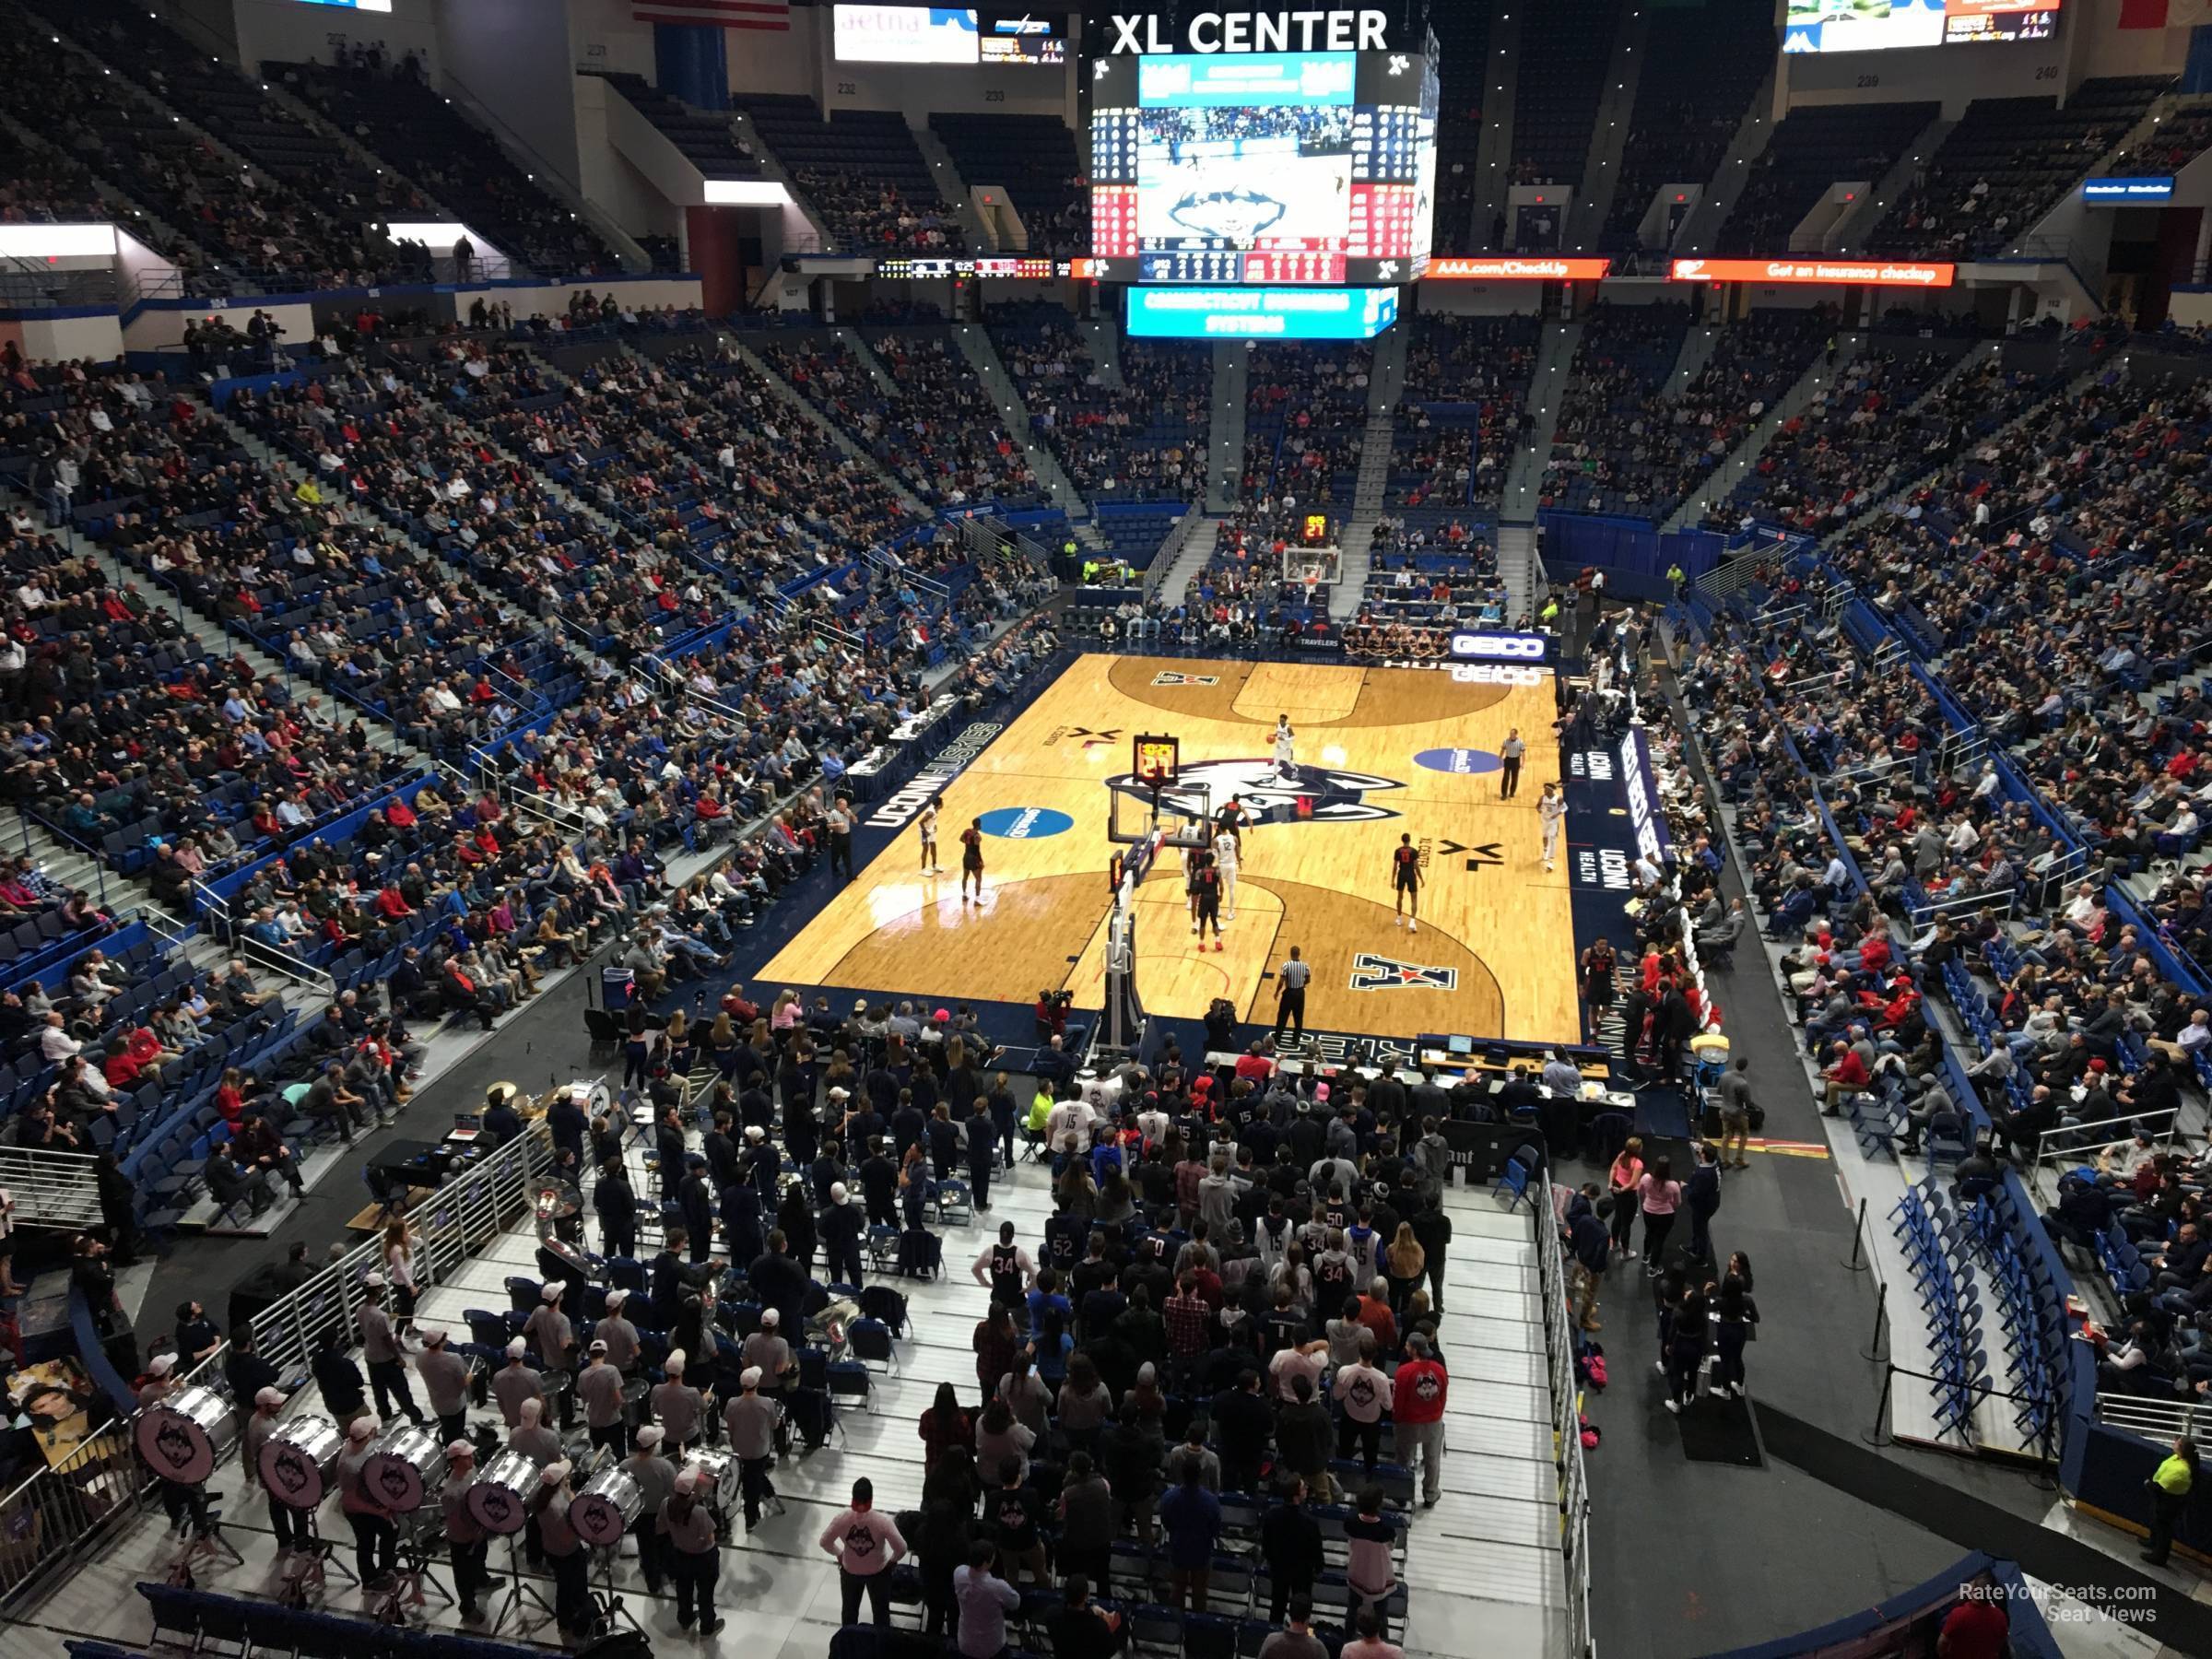 section 223, row a seat view  - xl center